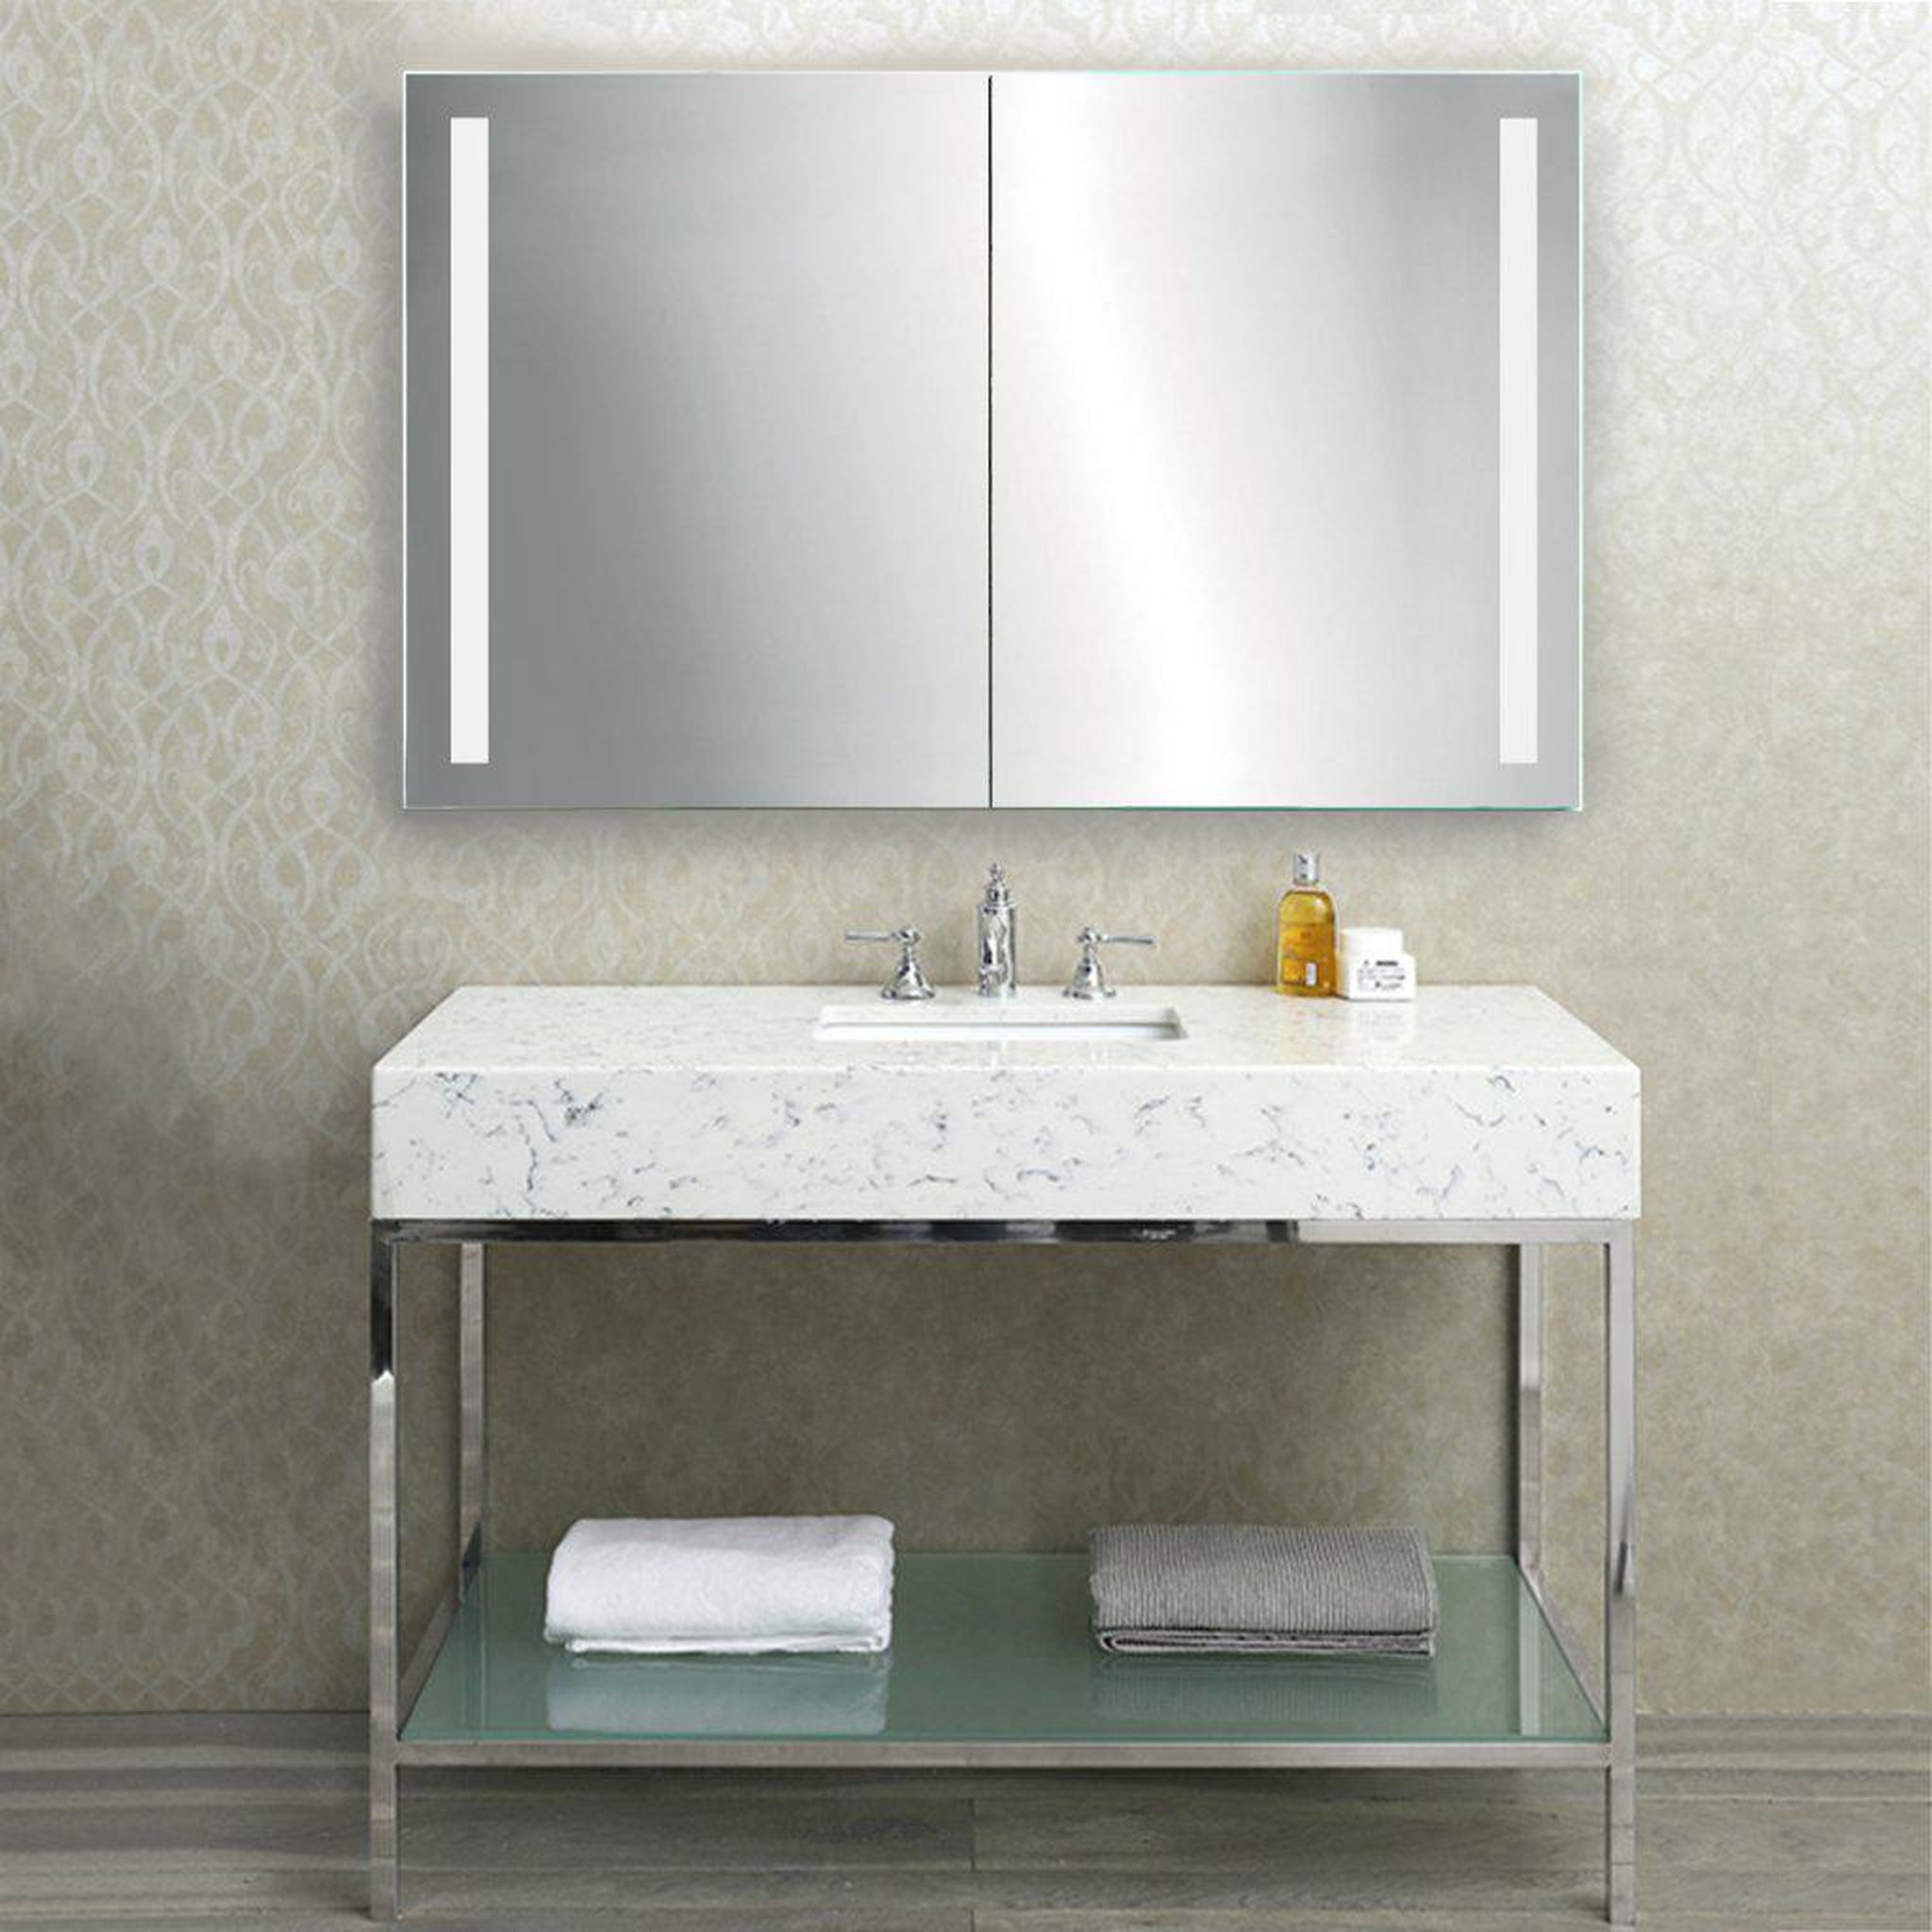 Krugg Reflections, Krugg Reflections Rolls 48" x 30" Double Dual Opening Rectangular Recessed/Surface-Mount Illuminated Silver Backed LED Medicine Cabinet Mirror With Built-in Defogger, Dimmer and Electrical Outlet